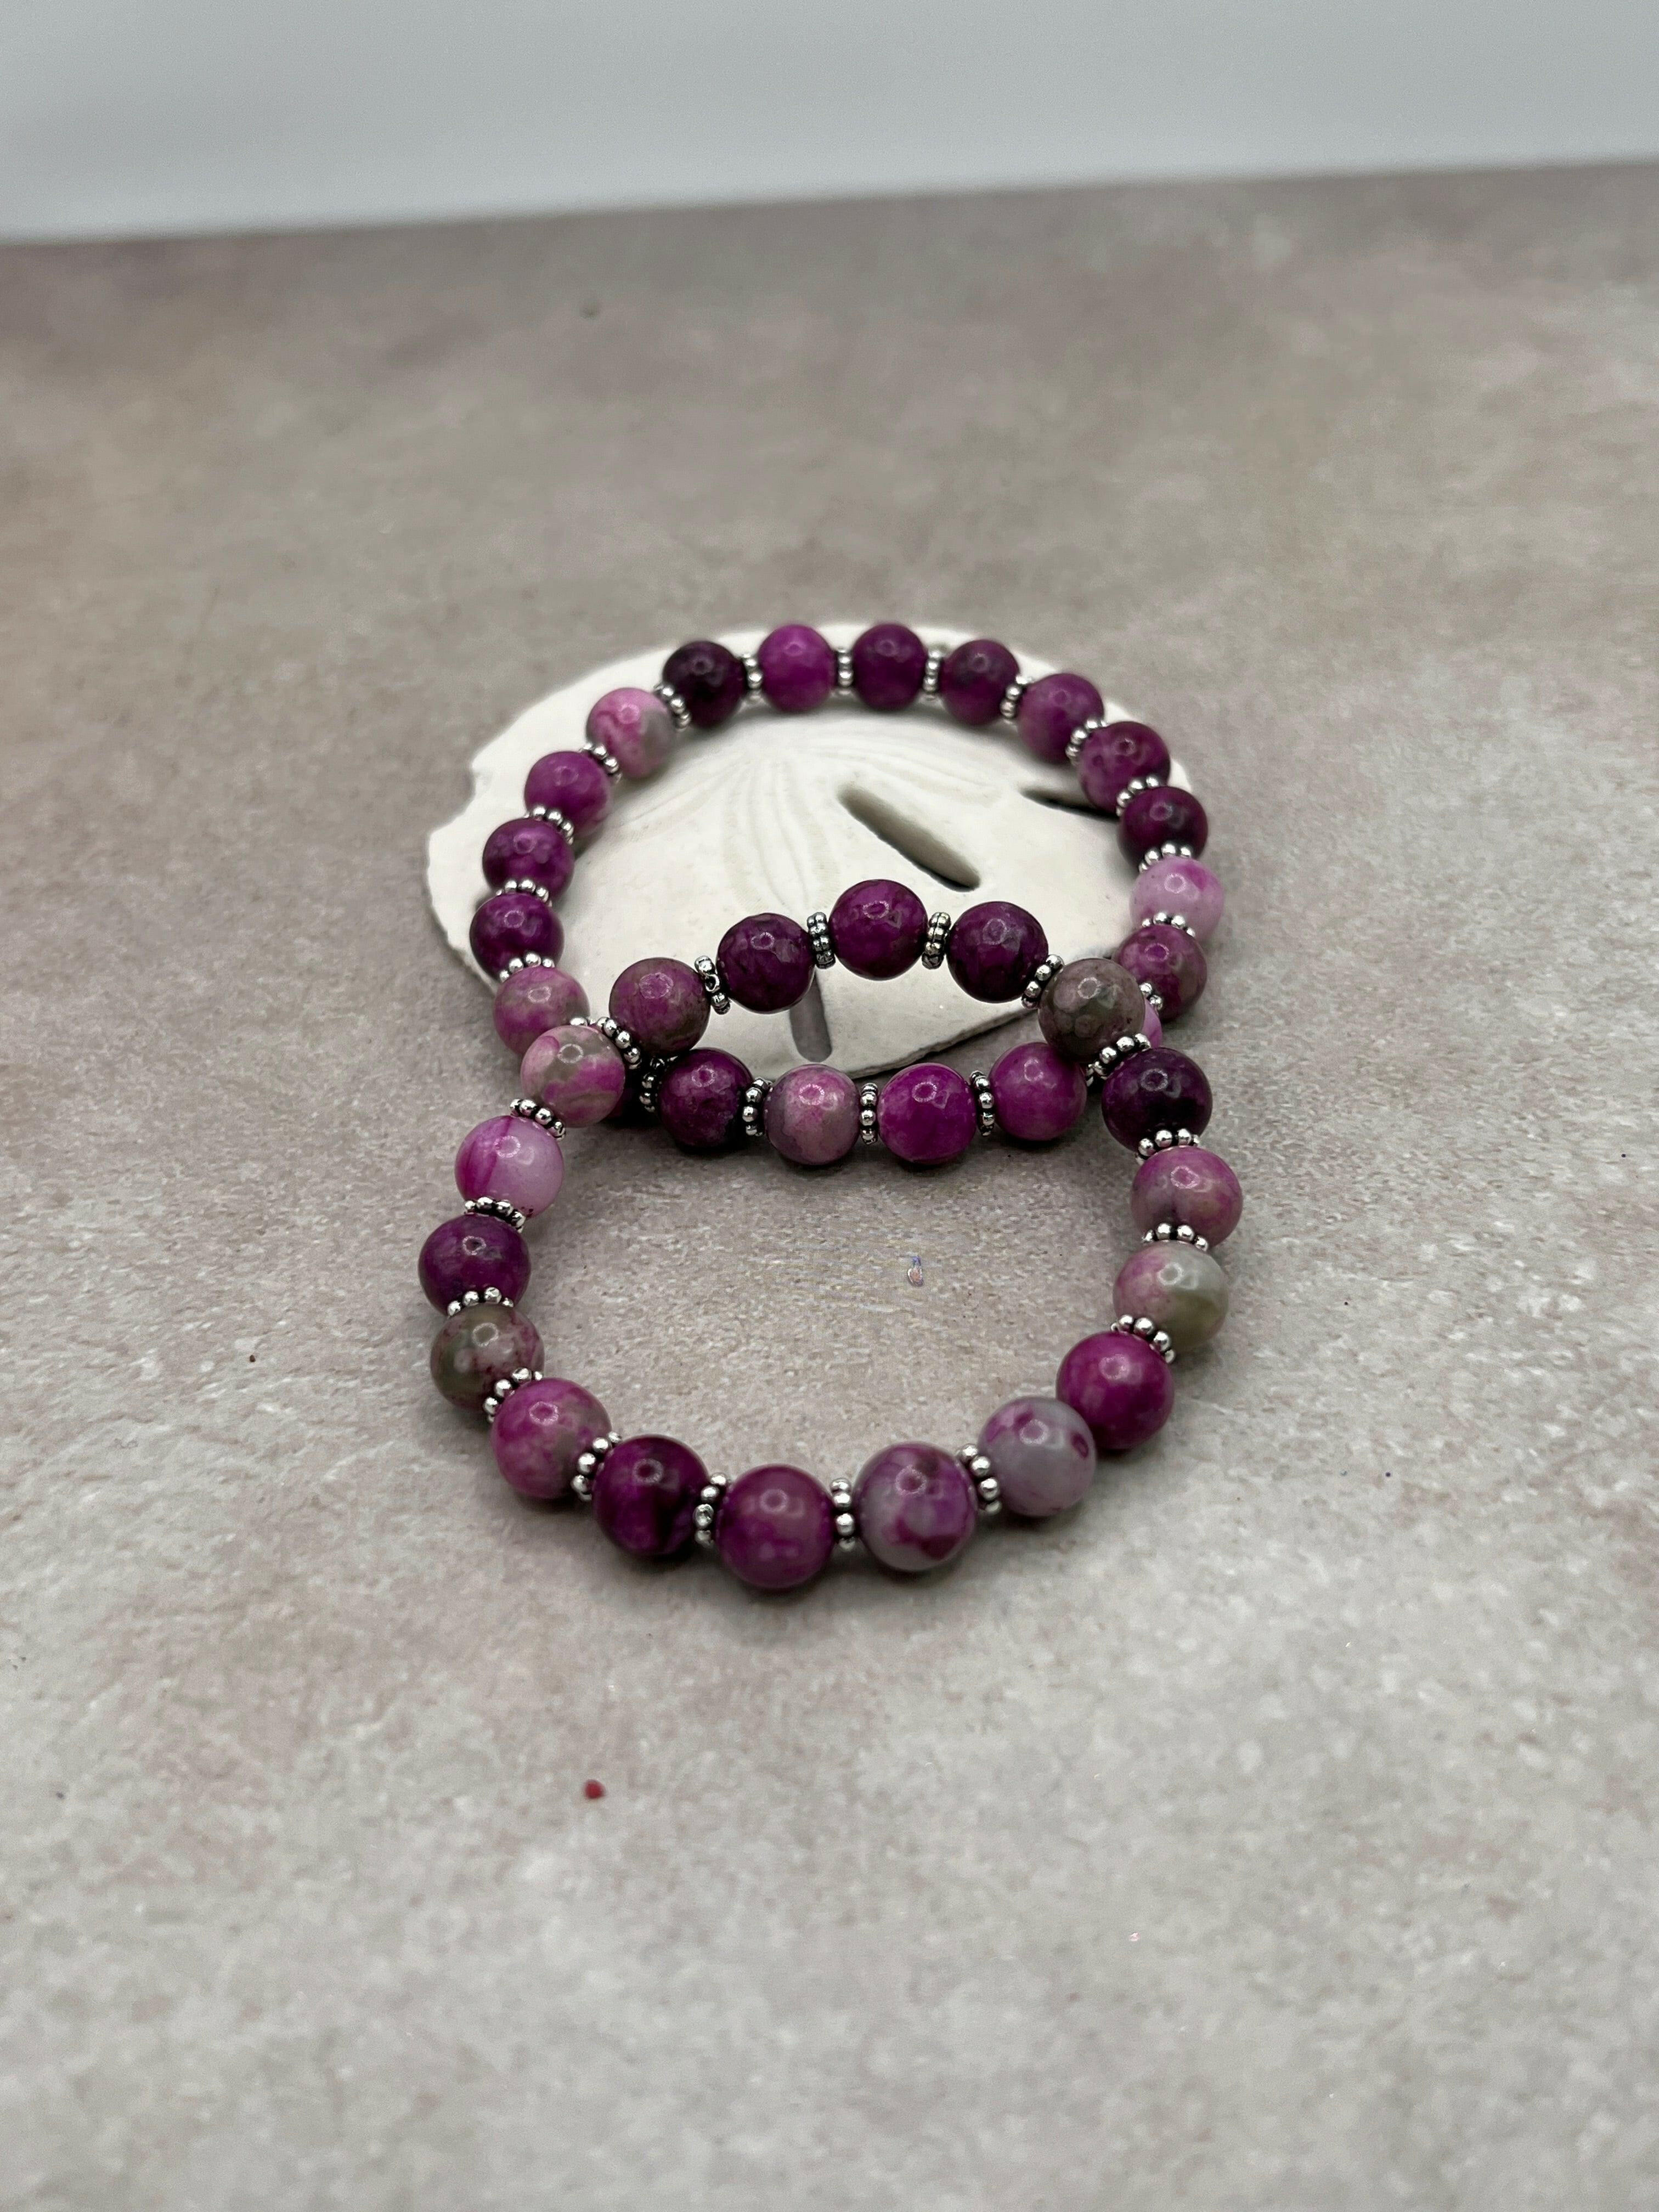 Bec Sue Jewelry Shop bracelet 6.5- 6 / purple / sugilite 8mm beads and silver spacers Sugilite Stone, Sugilite Bracelet Tags 558